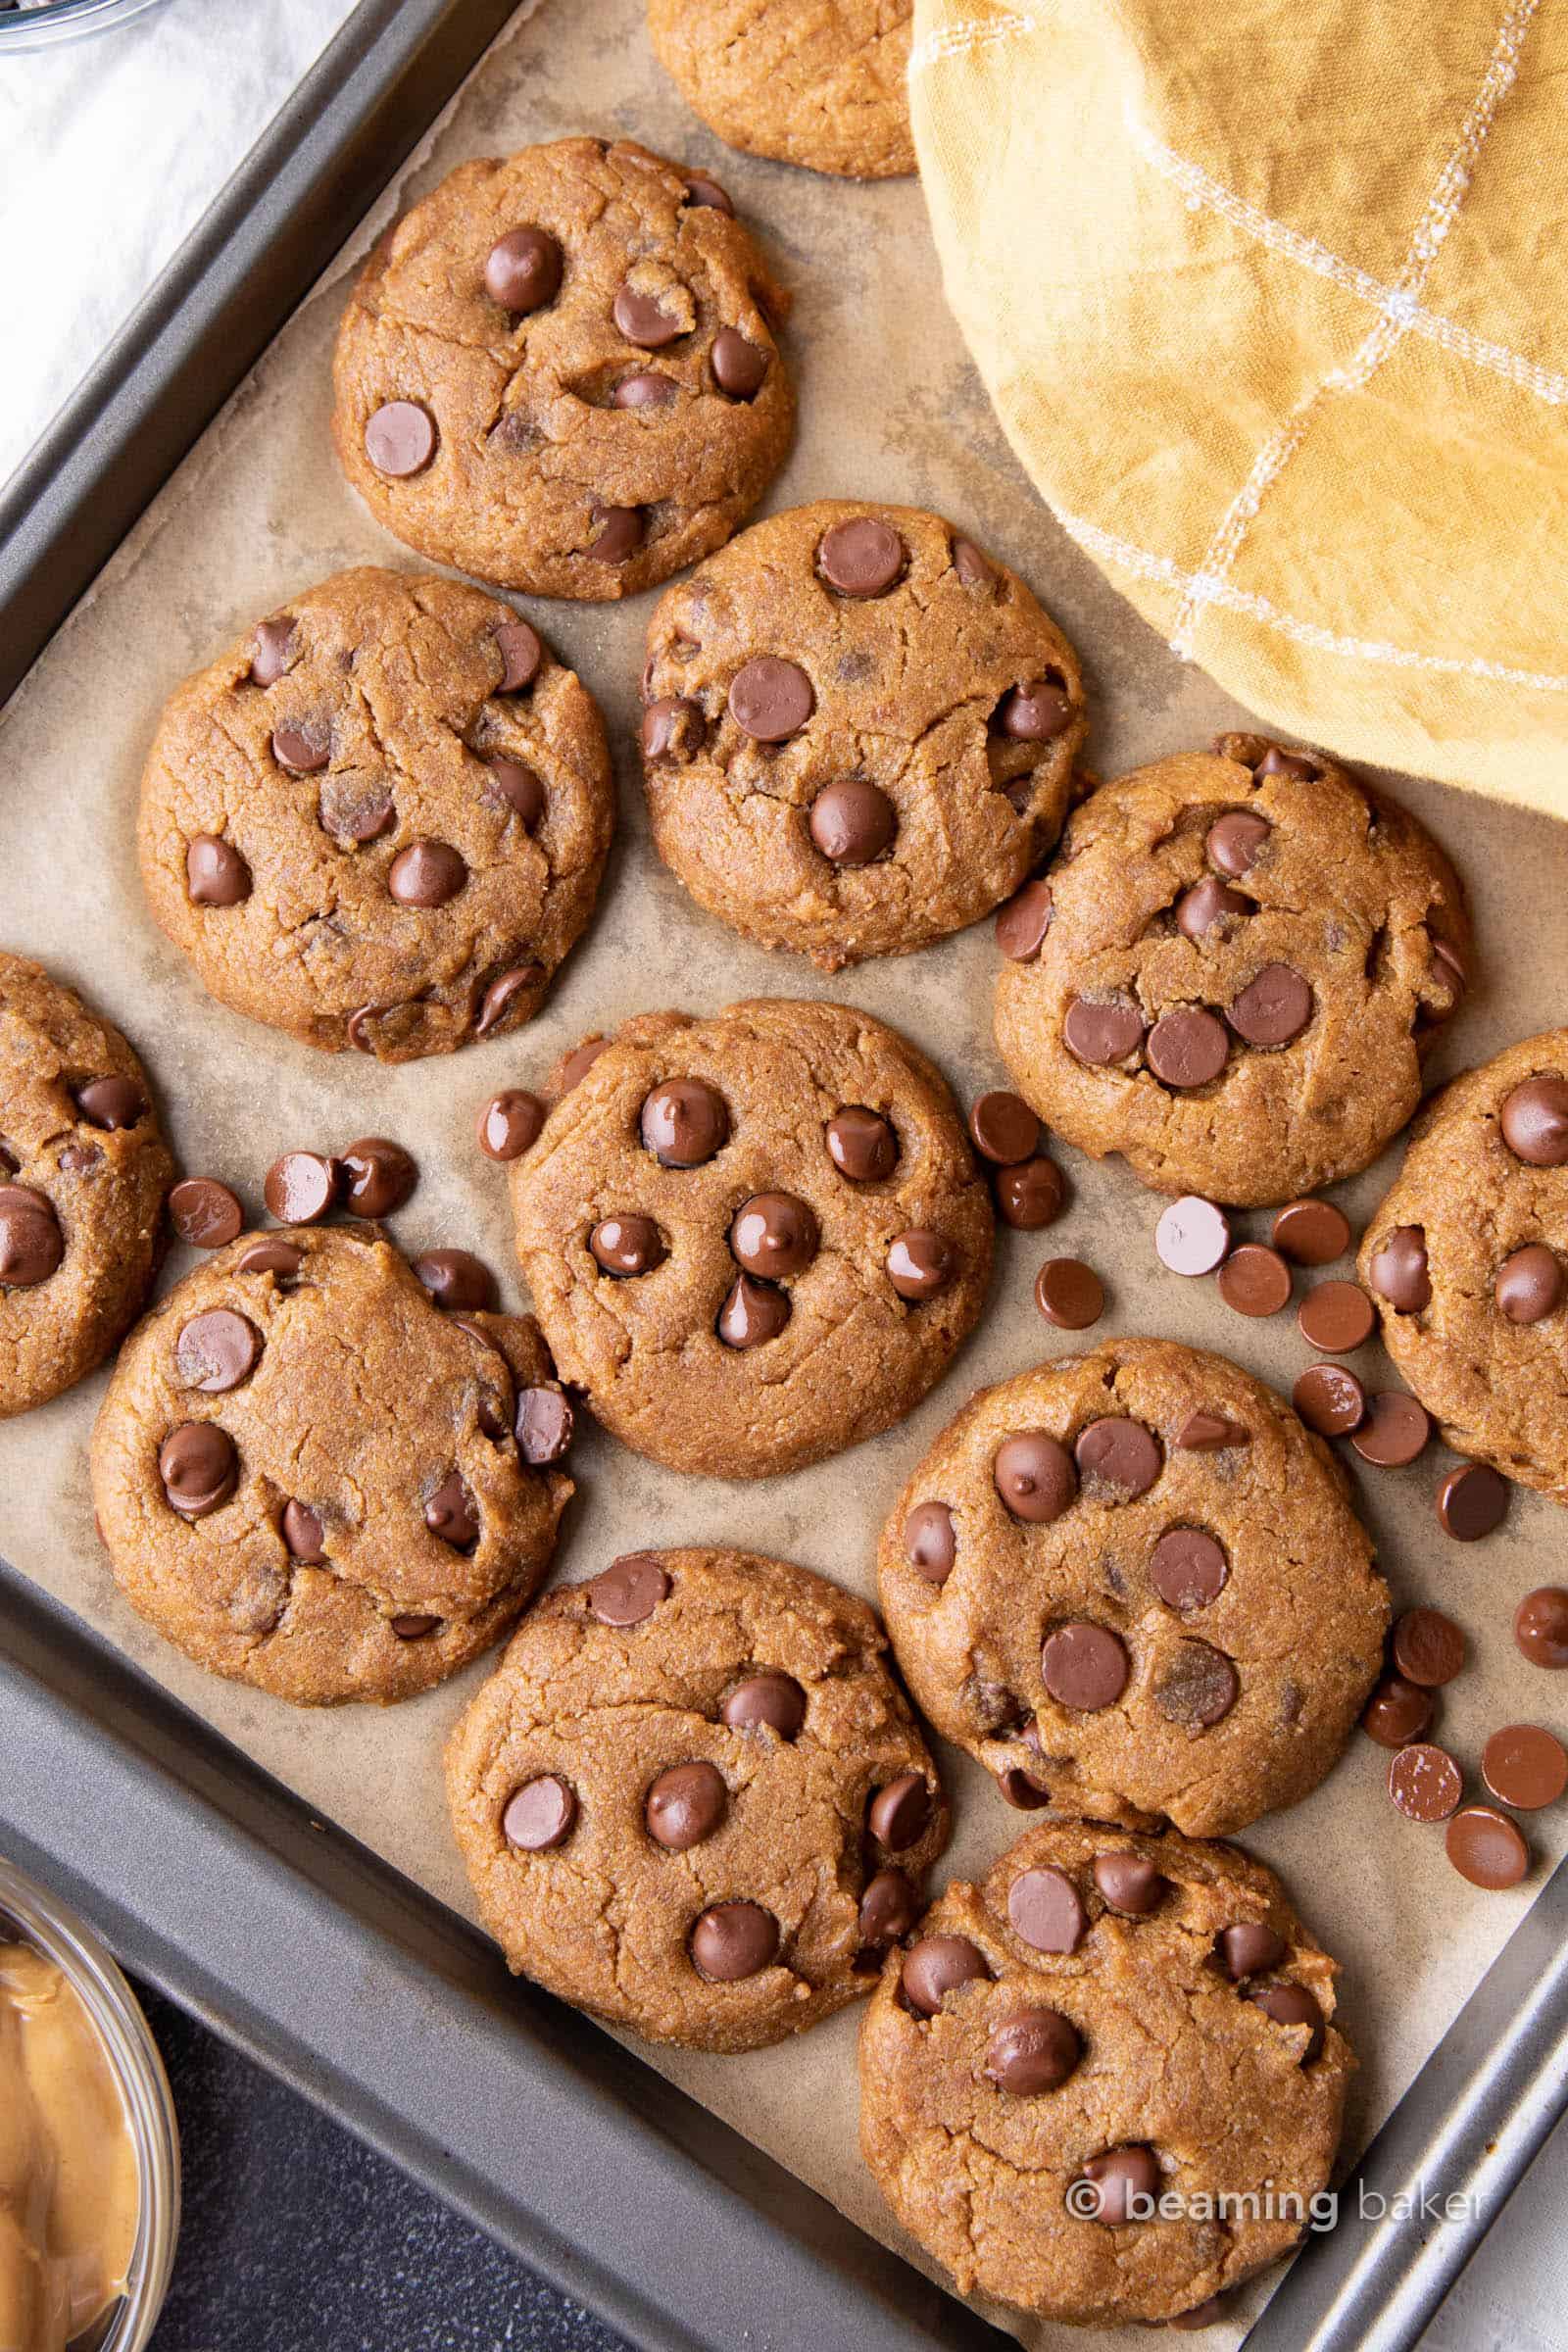 Vegan Peanut Butter Chocolate Chip Cookies: an easy recipe for chewy, moist vegan peanut butter chocolate chip cookies bursting with deep peanut butter flavor. #Vegan #PeanutButter #ChocolateChip #Cookies | Recipe at BeamingBaker.com